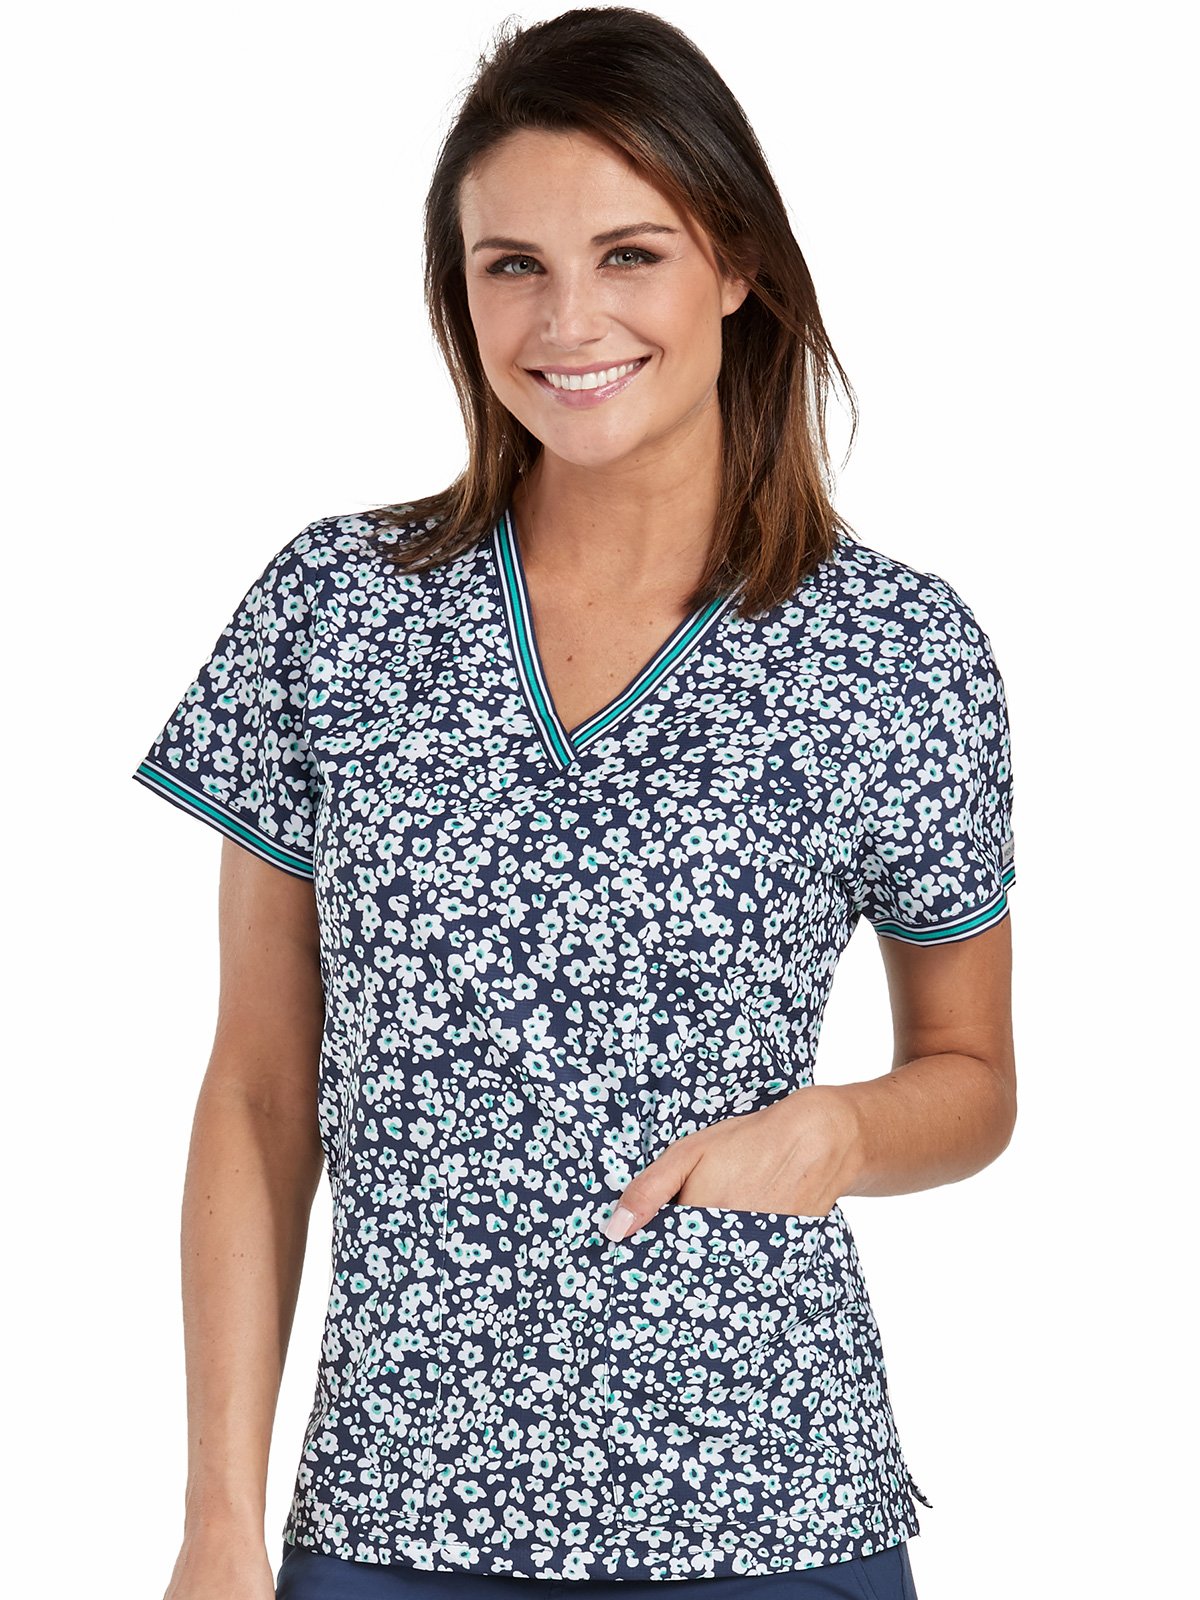 Med Couture Scrub Top Prints Navy Daisies